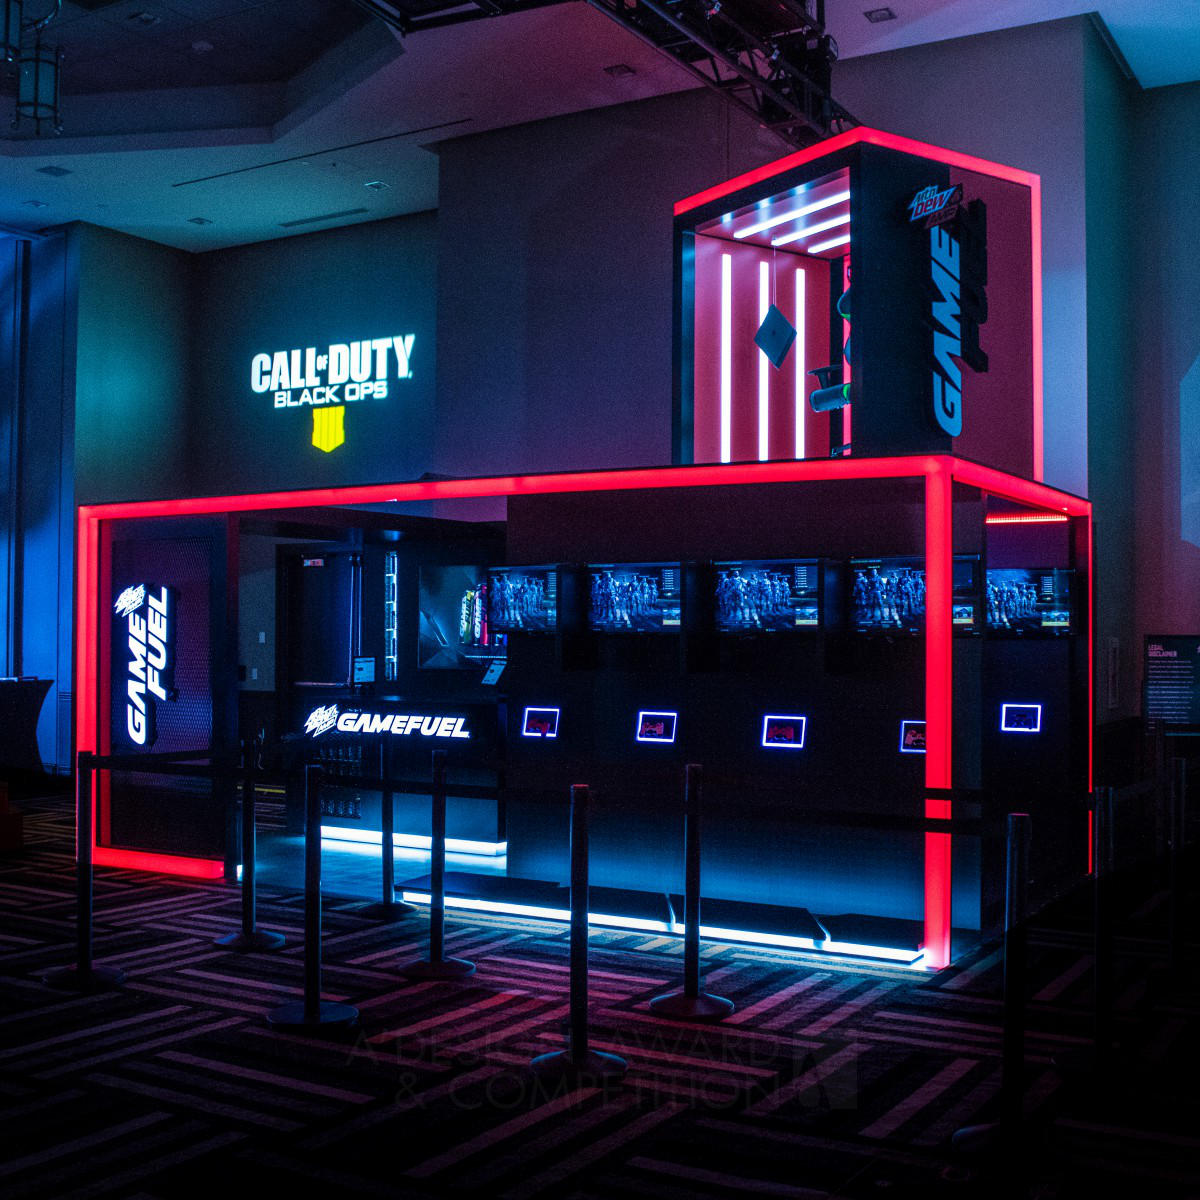 Game Fuel PRO-AM Consumer Experience Experiential by PepsiCo Design and Innovation Golden Event and Happening Design Award Winner 2020 